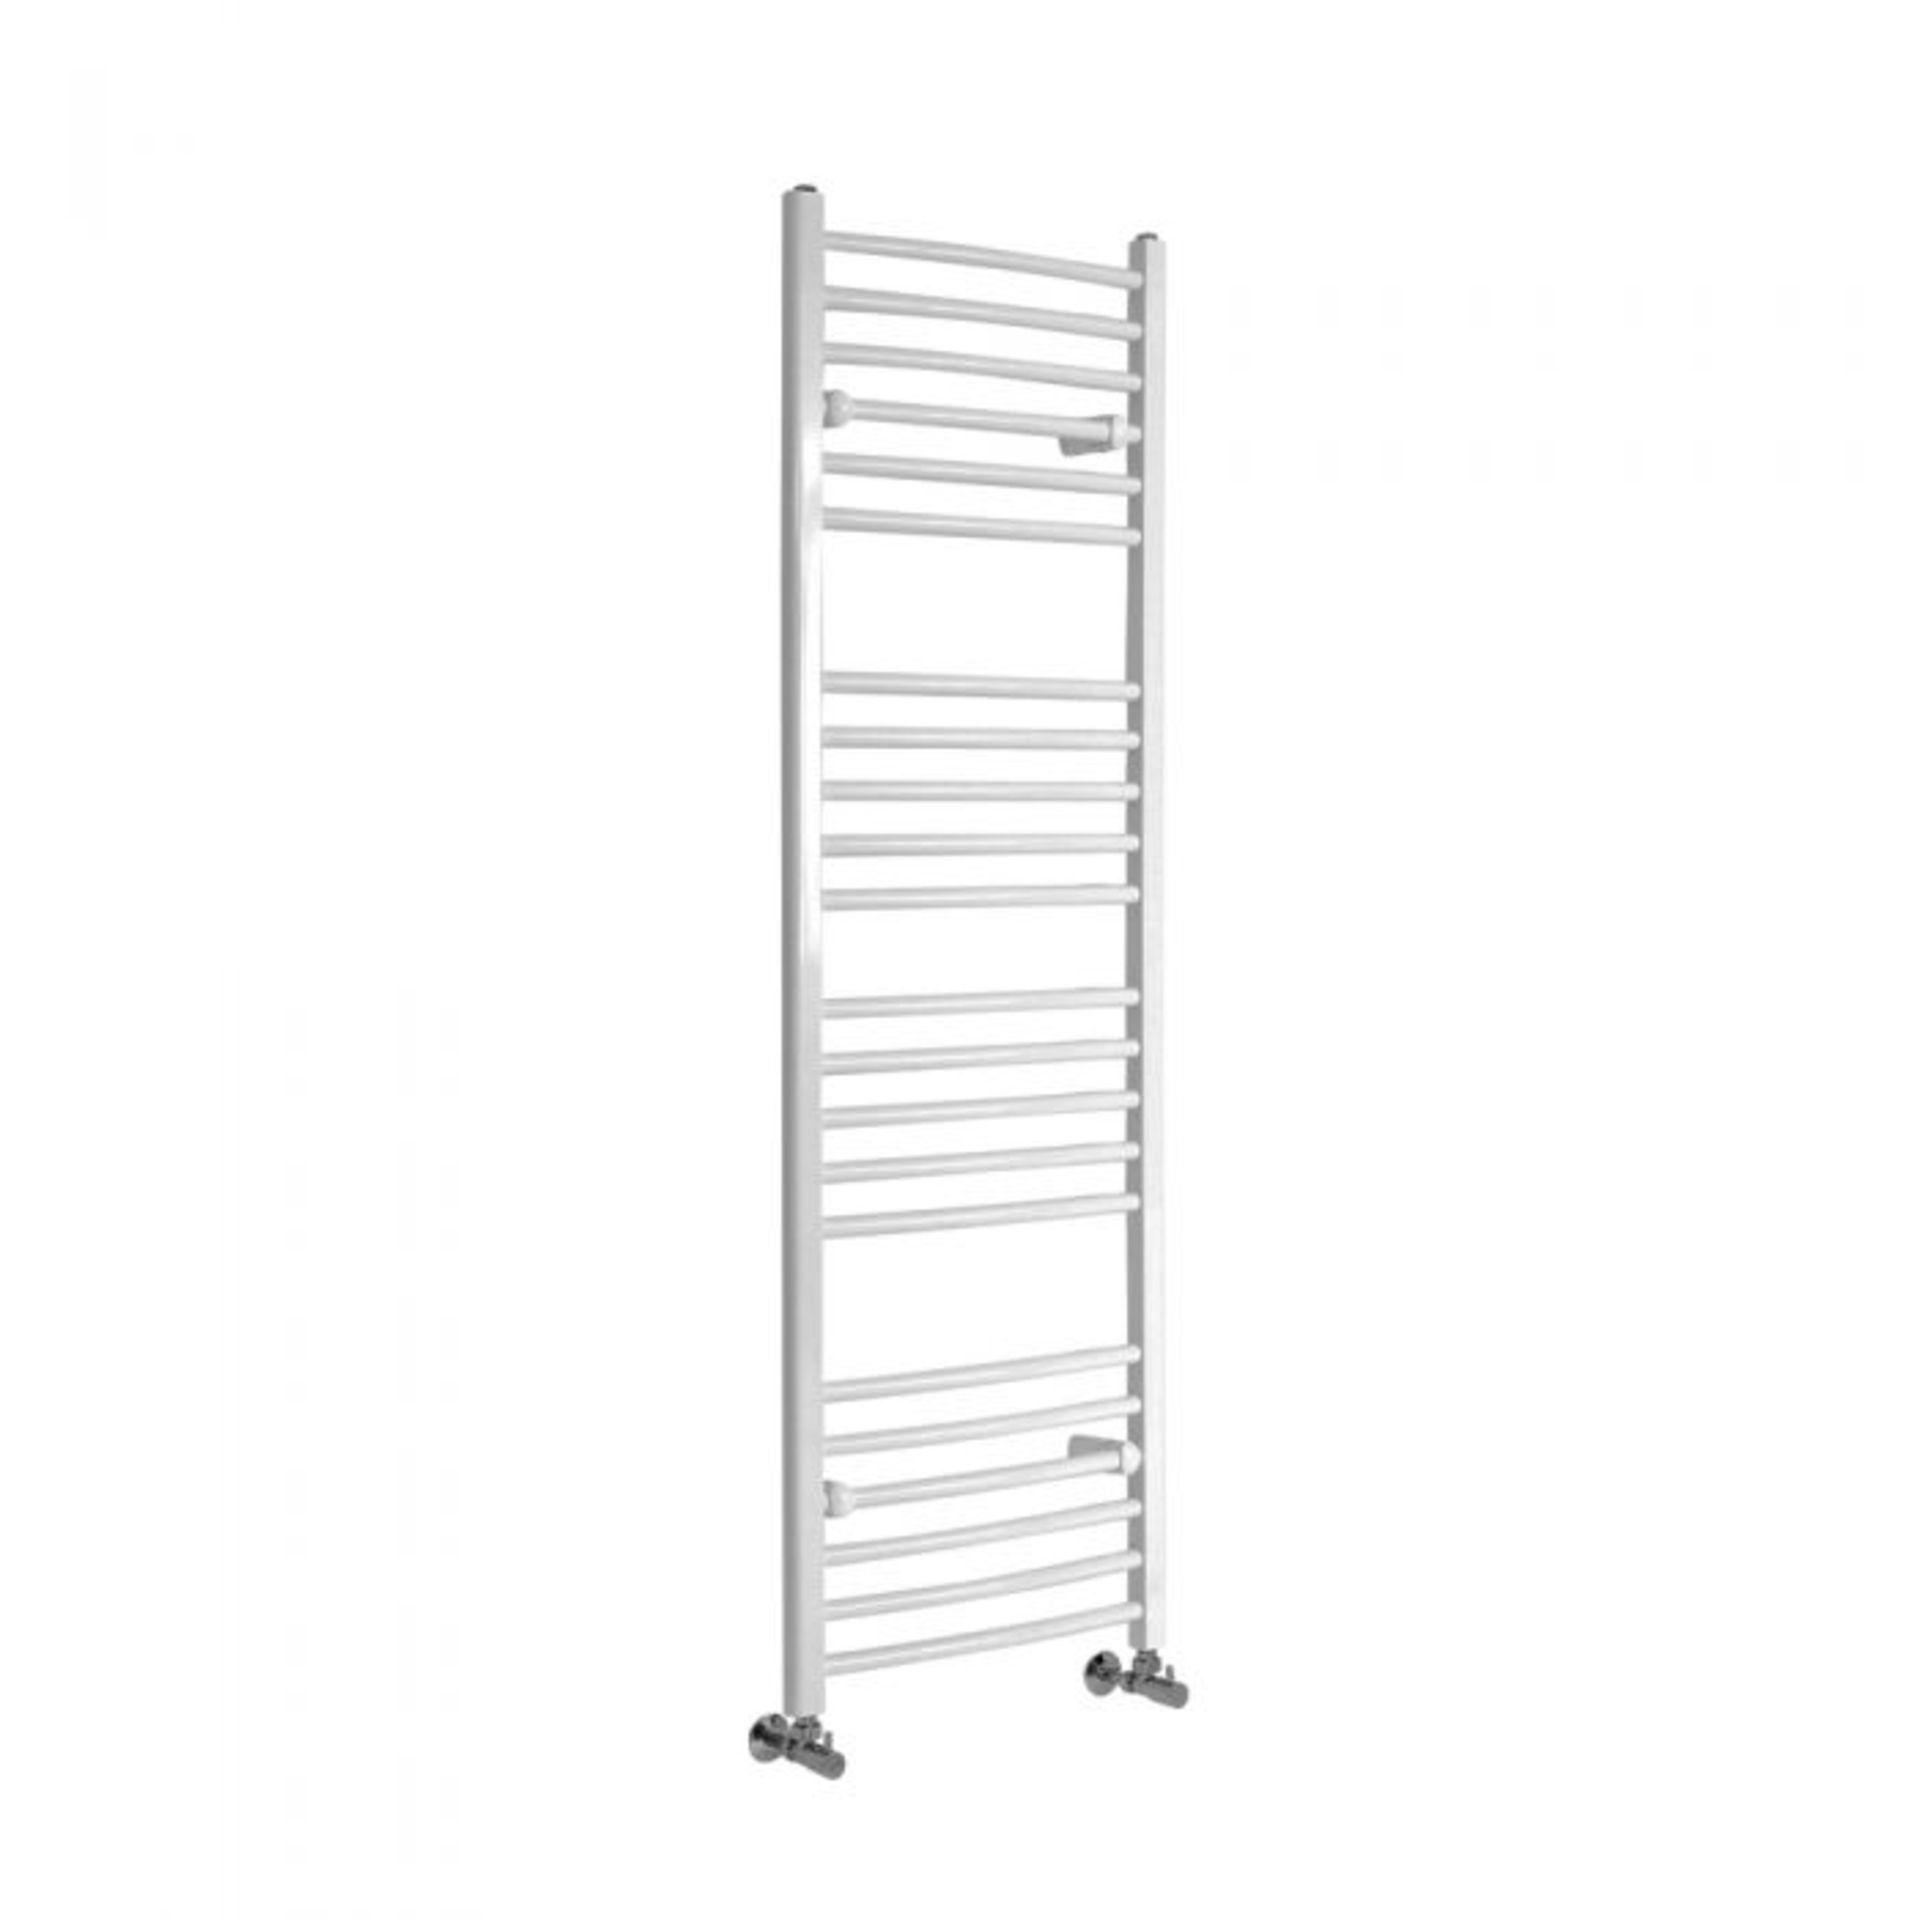 NEW (EX195) 1600x500mm Curved White Heated Towel Rail. - Image 2 of 2